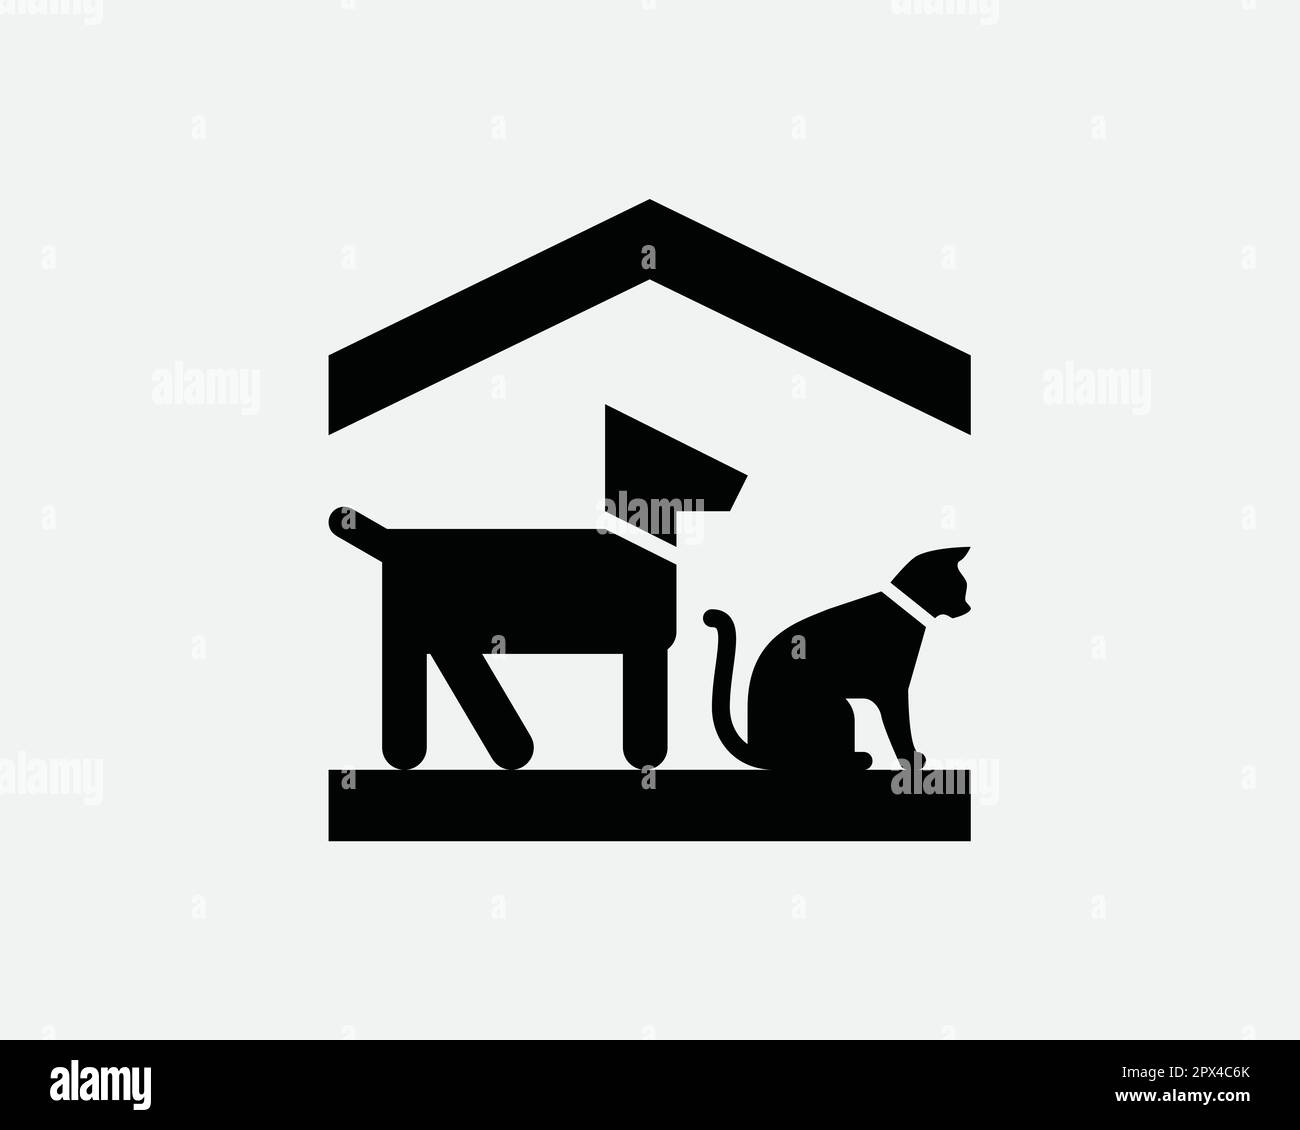 Animal Shelter Icon. Dog Dogs Cat Cats Rescue House Home Safety Symbol. Indoor Pet Boarding Breeding Sign Vector Graphic Illustration Clipart Cricut Stock Vector